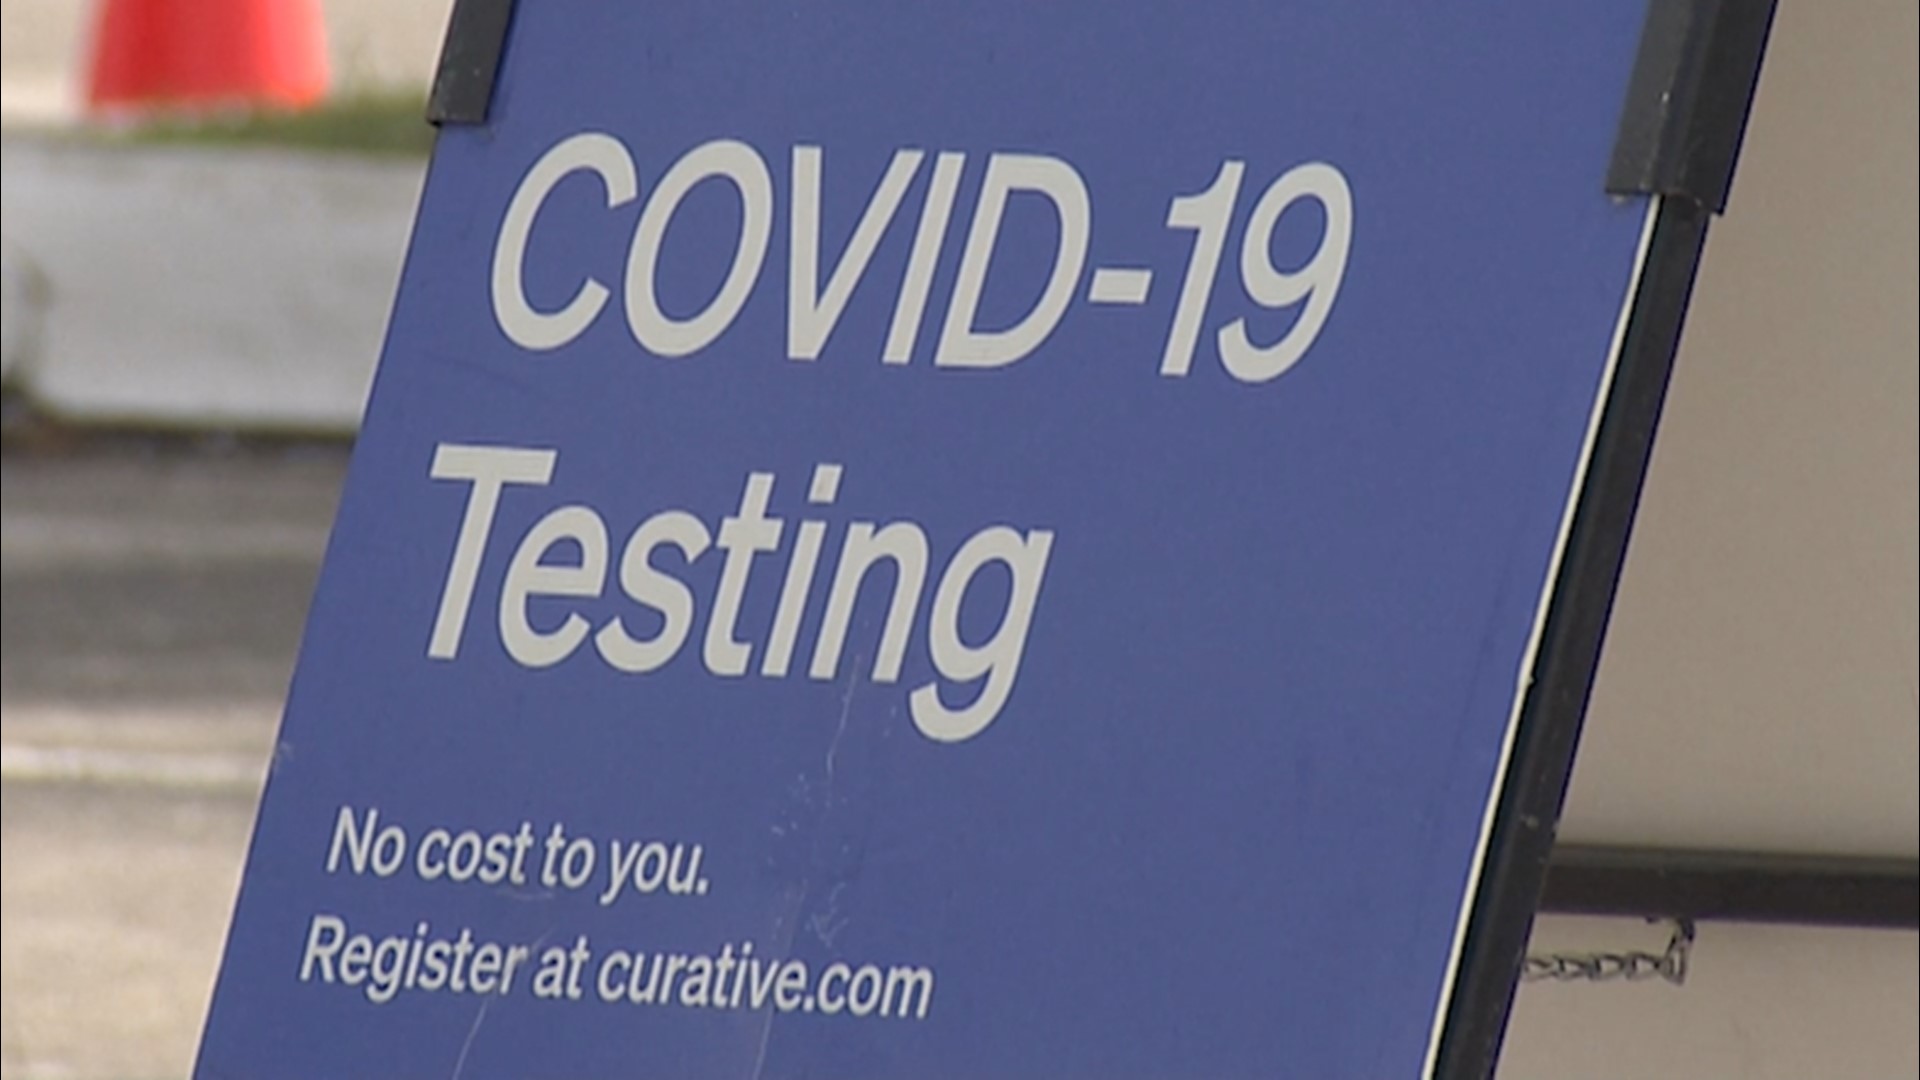 Demand for COVID-19 testing continued in Houston after Christmas.